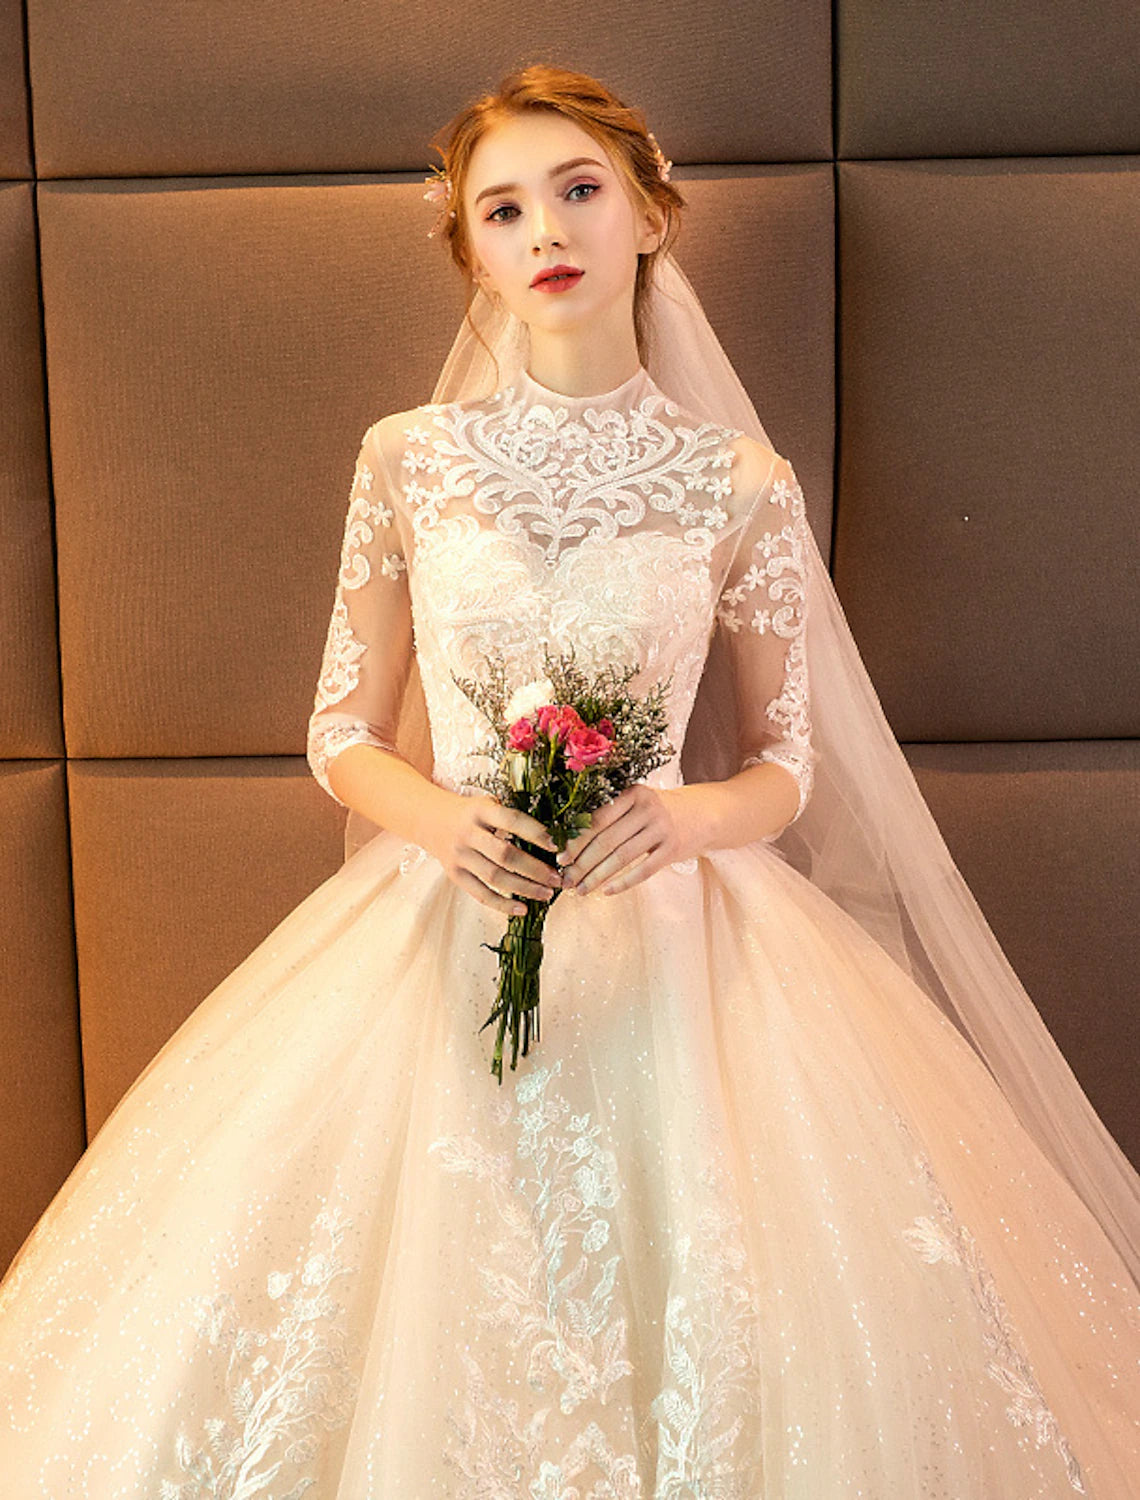 Engagement Sparkle & Shine Formal Fall Wedding Dresses Ball Gown High Neck Long Sleeve Cathedral Train Lace Bridal Gowns With Sequin Appliques Summer Wedding Party